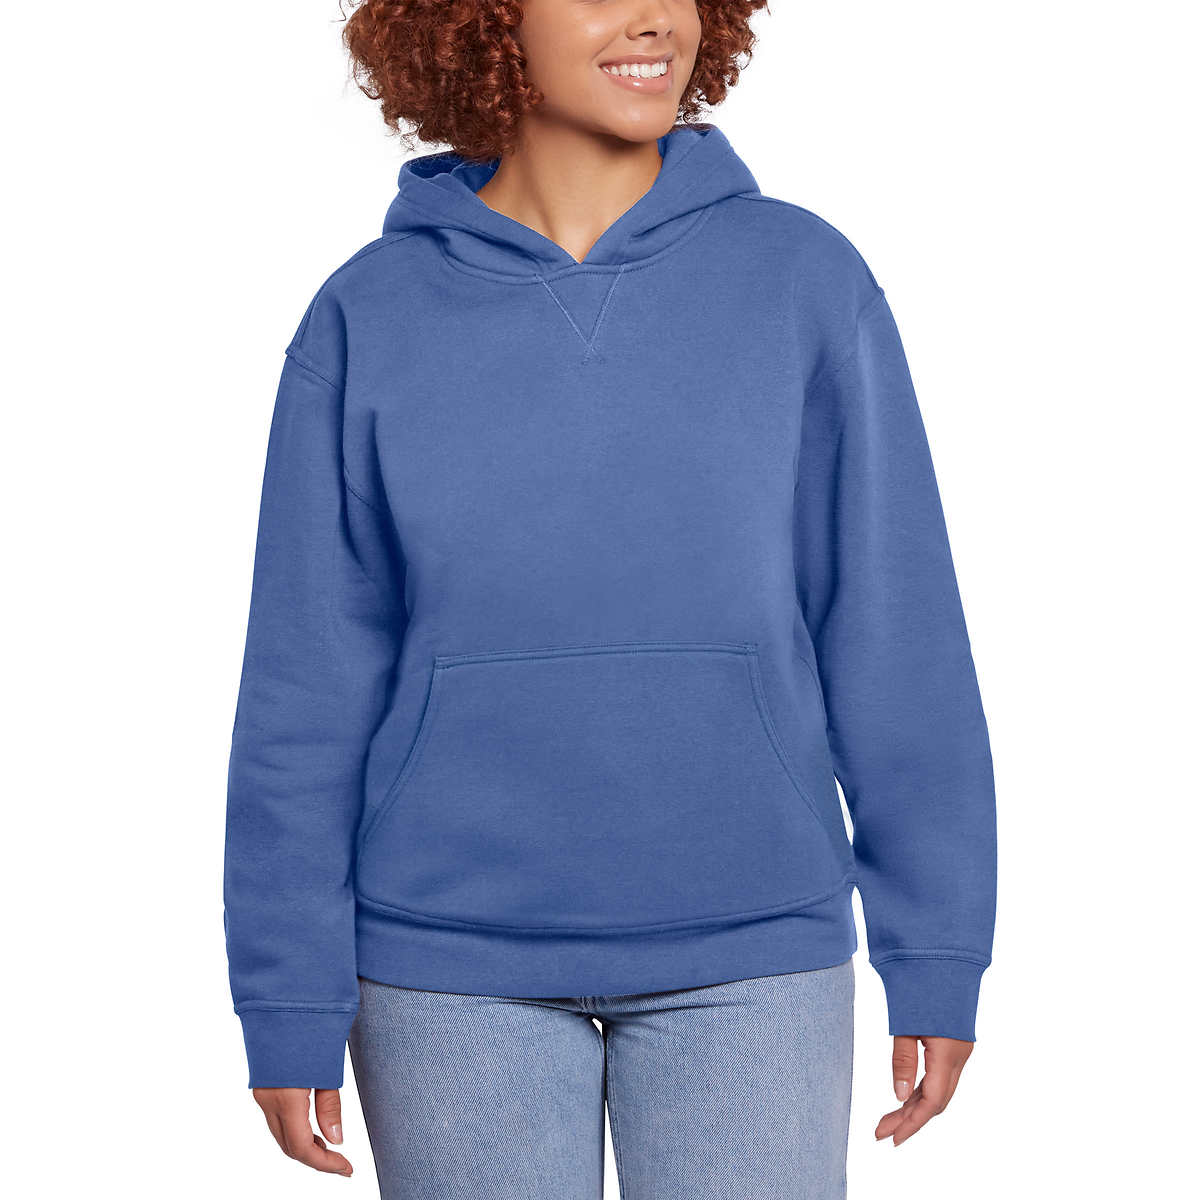 THE GYM PEOPLE Women's Basic Pullover Hoodie Loose fit Ultra Soft Fleece  hooded Sweatshirt With Pockets